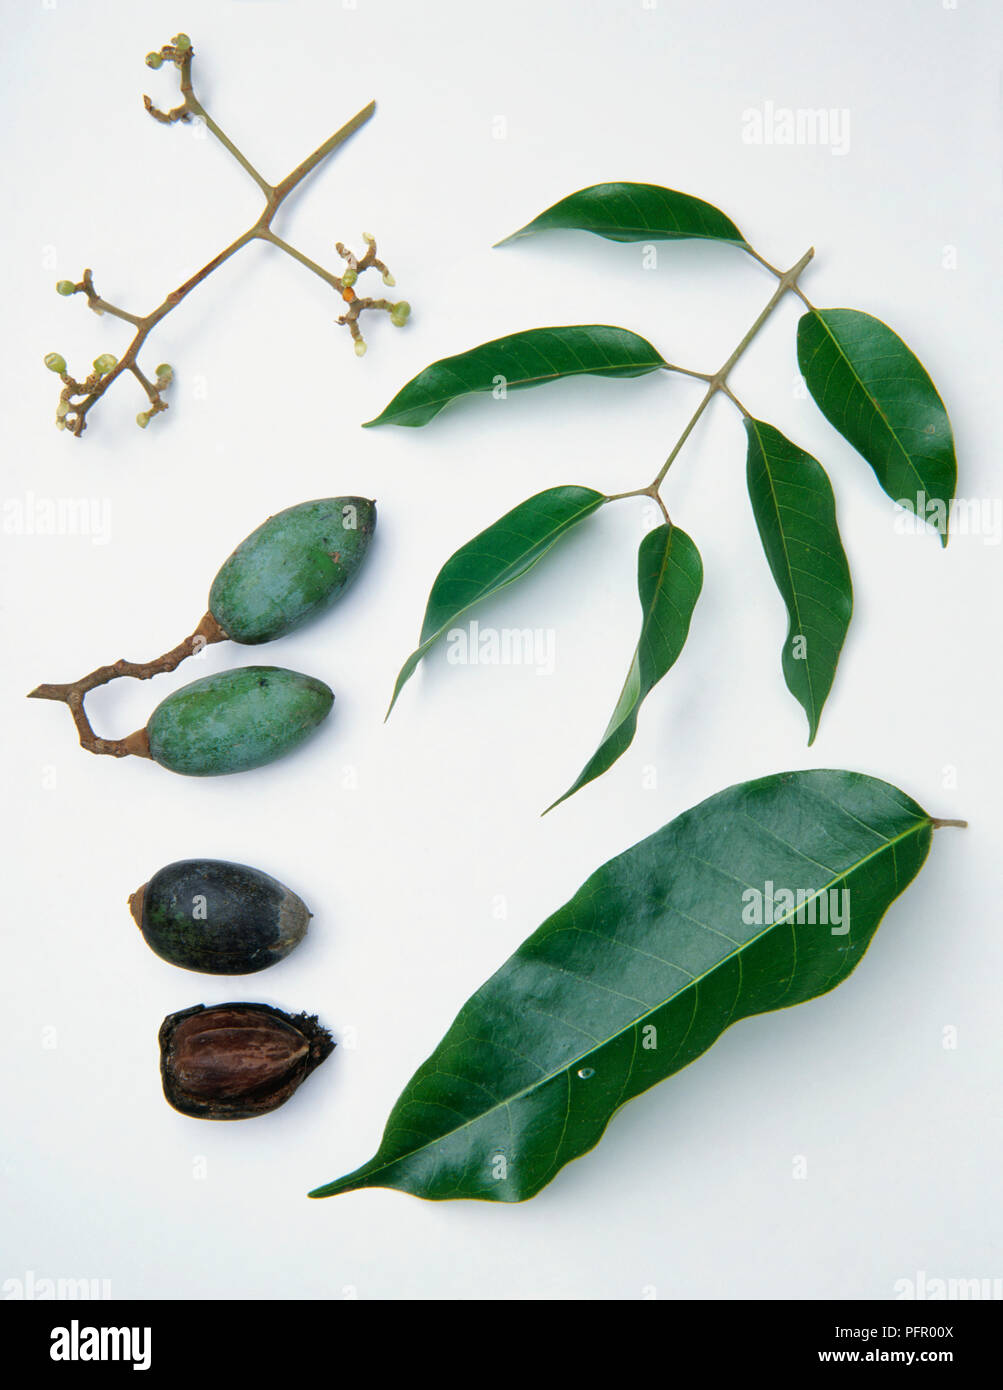 Canarium indicum (Java almond), shiny green leaves on stem, buds, and ripe and immature fruit Stock Photo